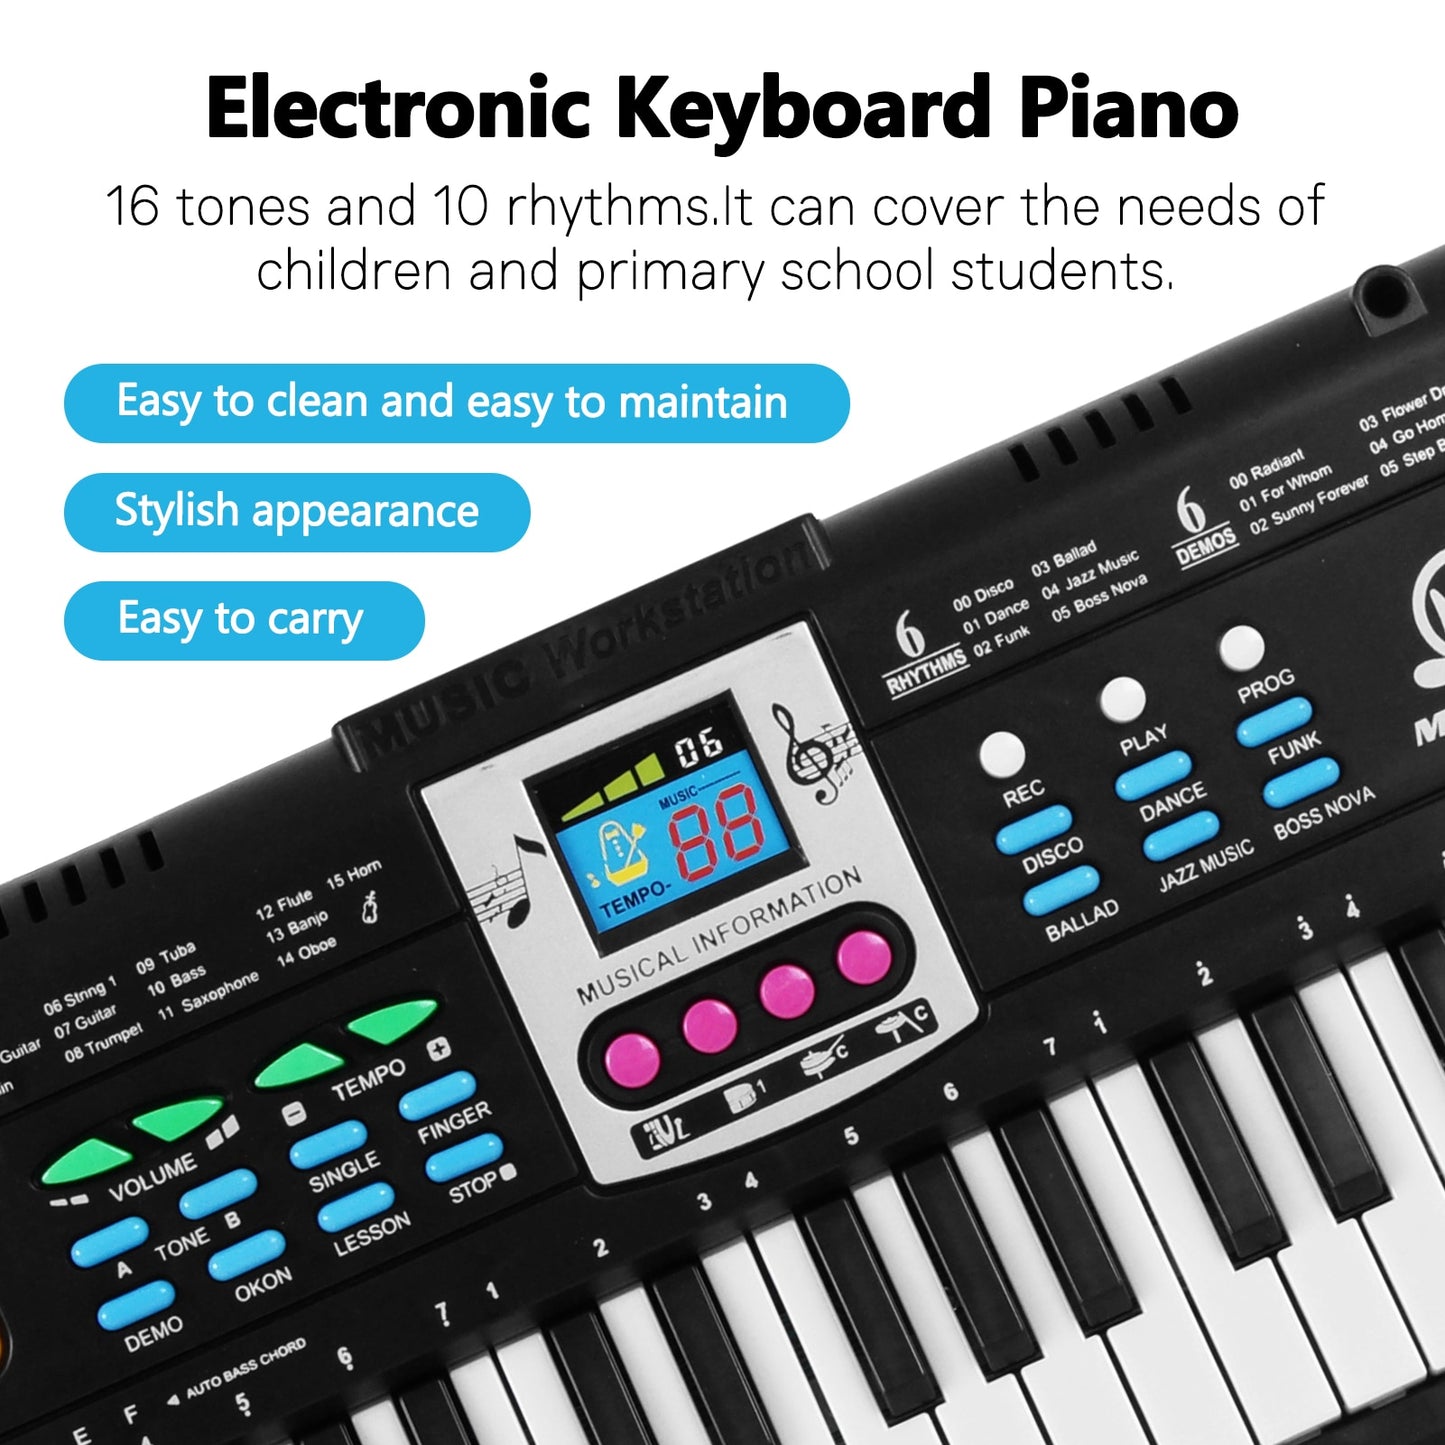 61 Keys Digital Music Electronic Keyboard Kids Multifunctional Electric Piano with Microphone Interface Musical Instrument